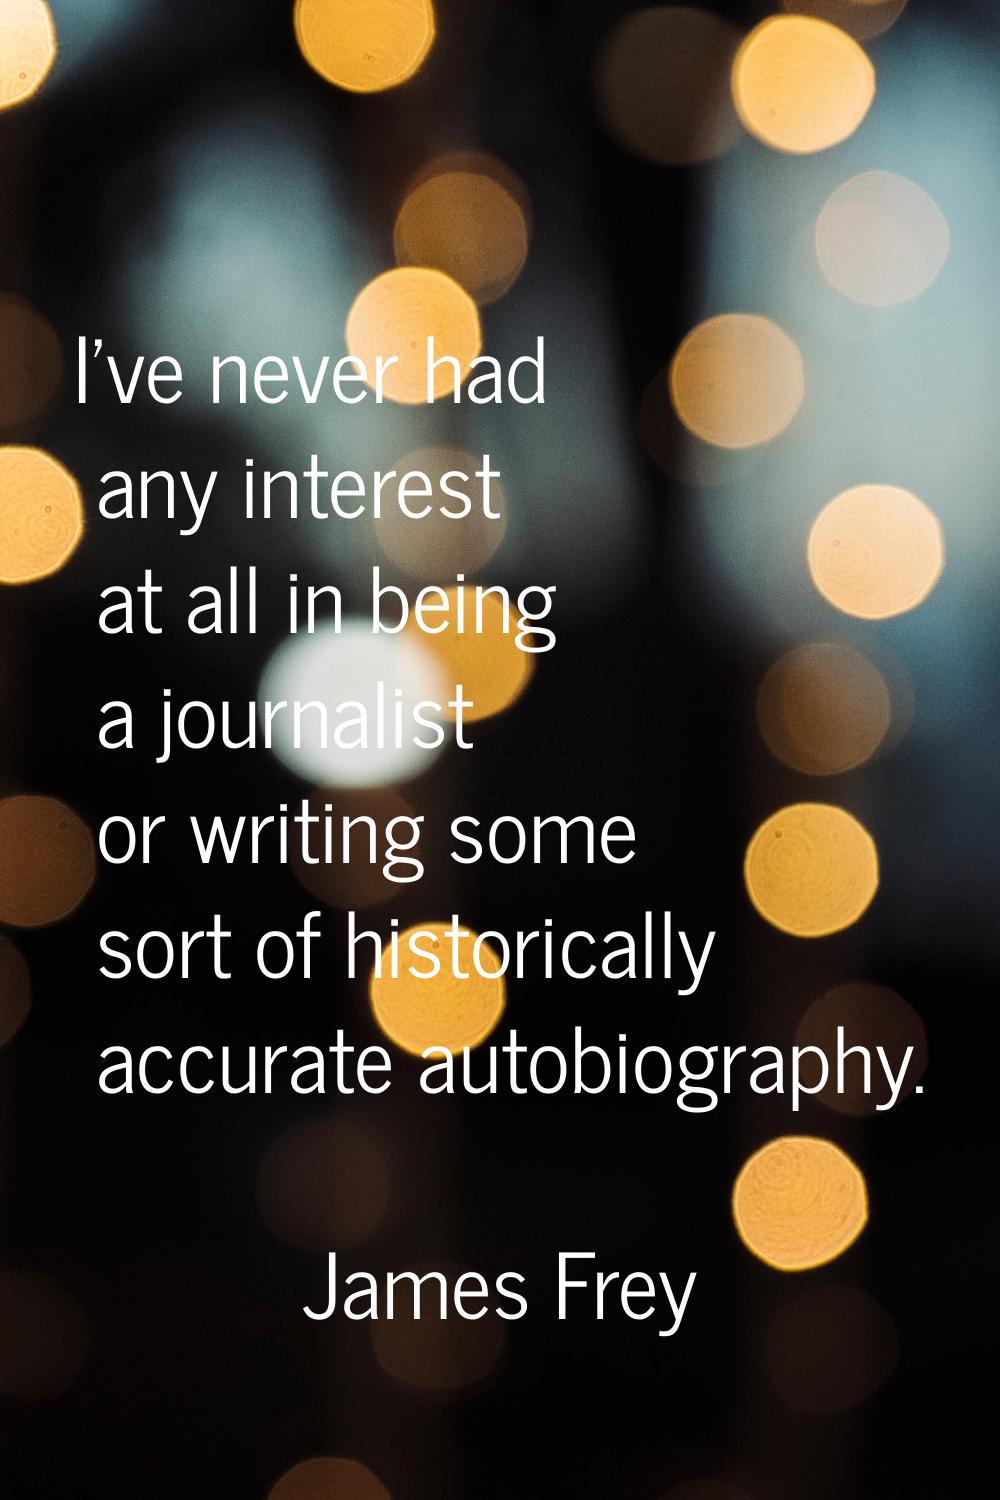 I've never had any interest at all in being a journalist or writing some sort of historically accur